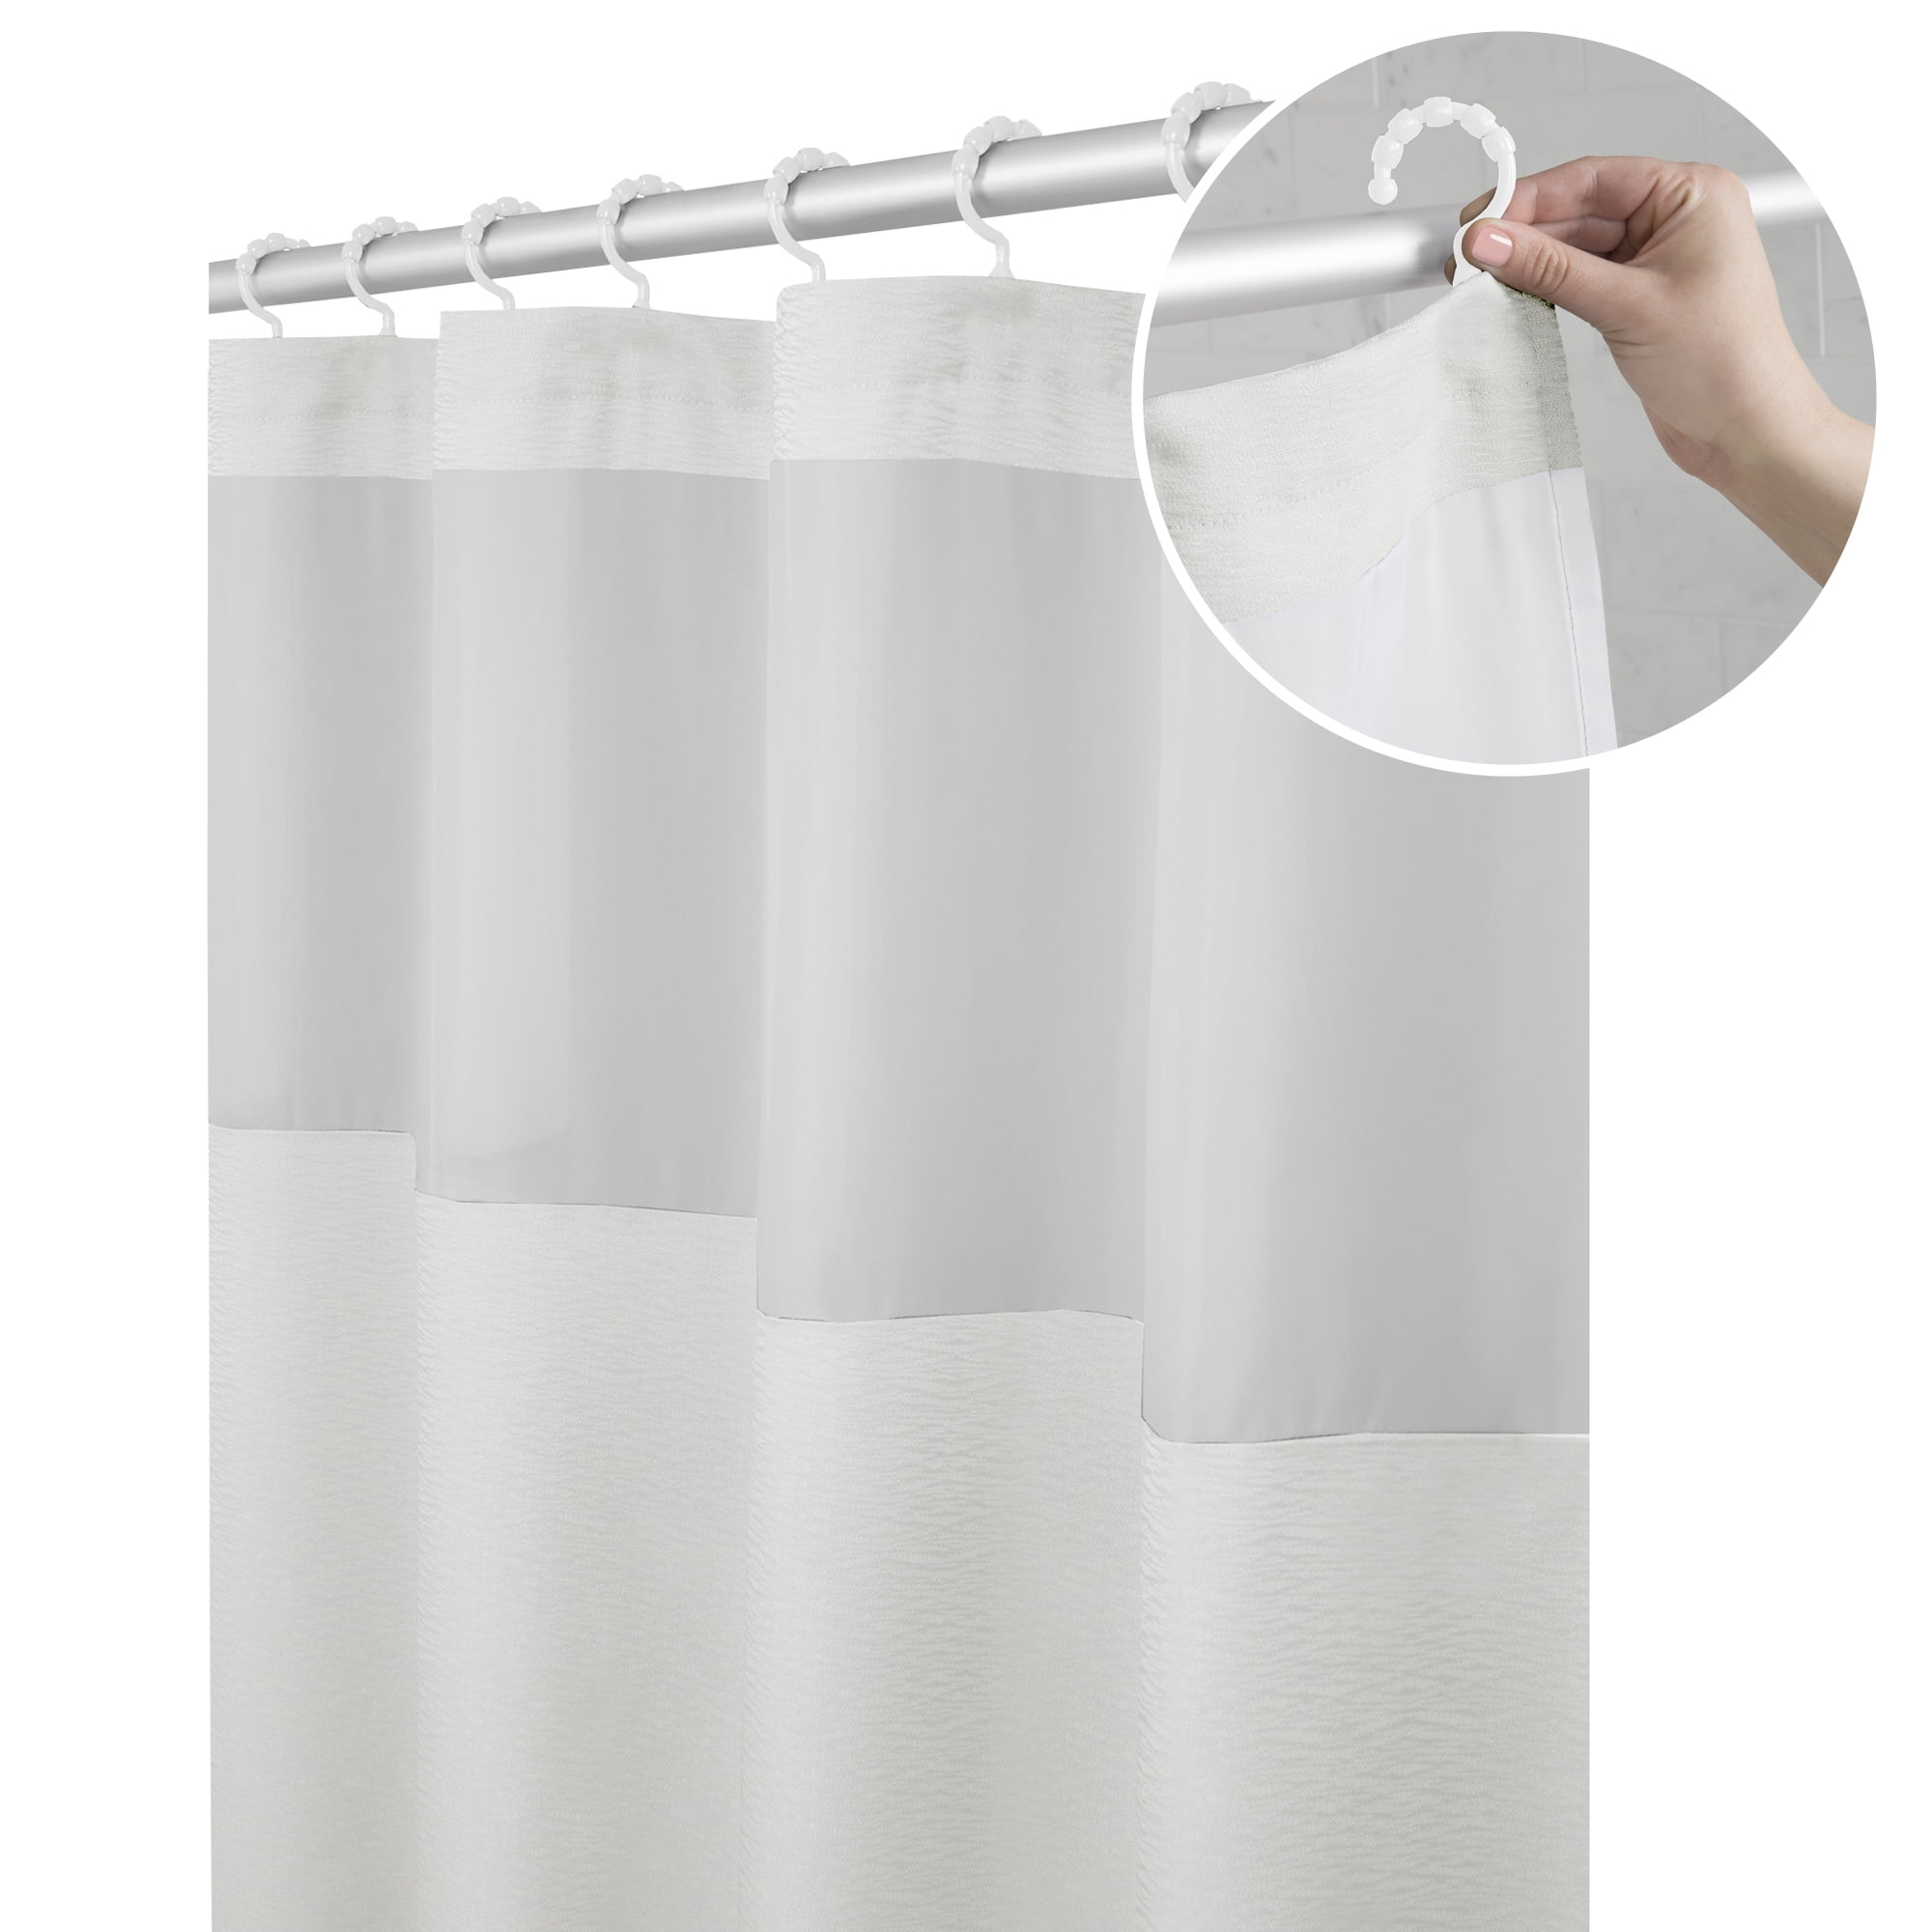 Set of 12 & N&Y Home Fabric Shower Curtain Liner Solid White with Magnets Maytex Metal Double Roller Glide Shower Curtain Ring/Hooks 70 x 72 inches for Bathroom 70x72 Brushed Nickel